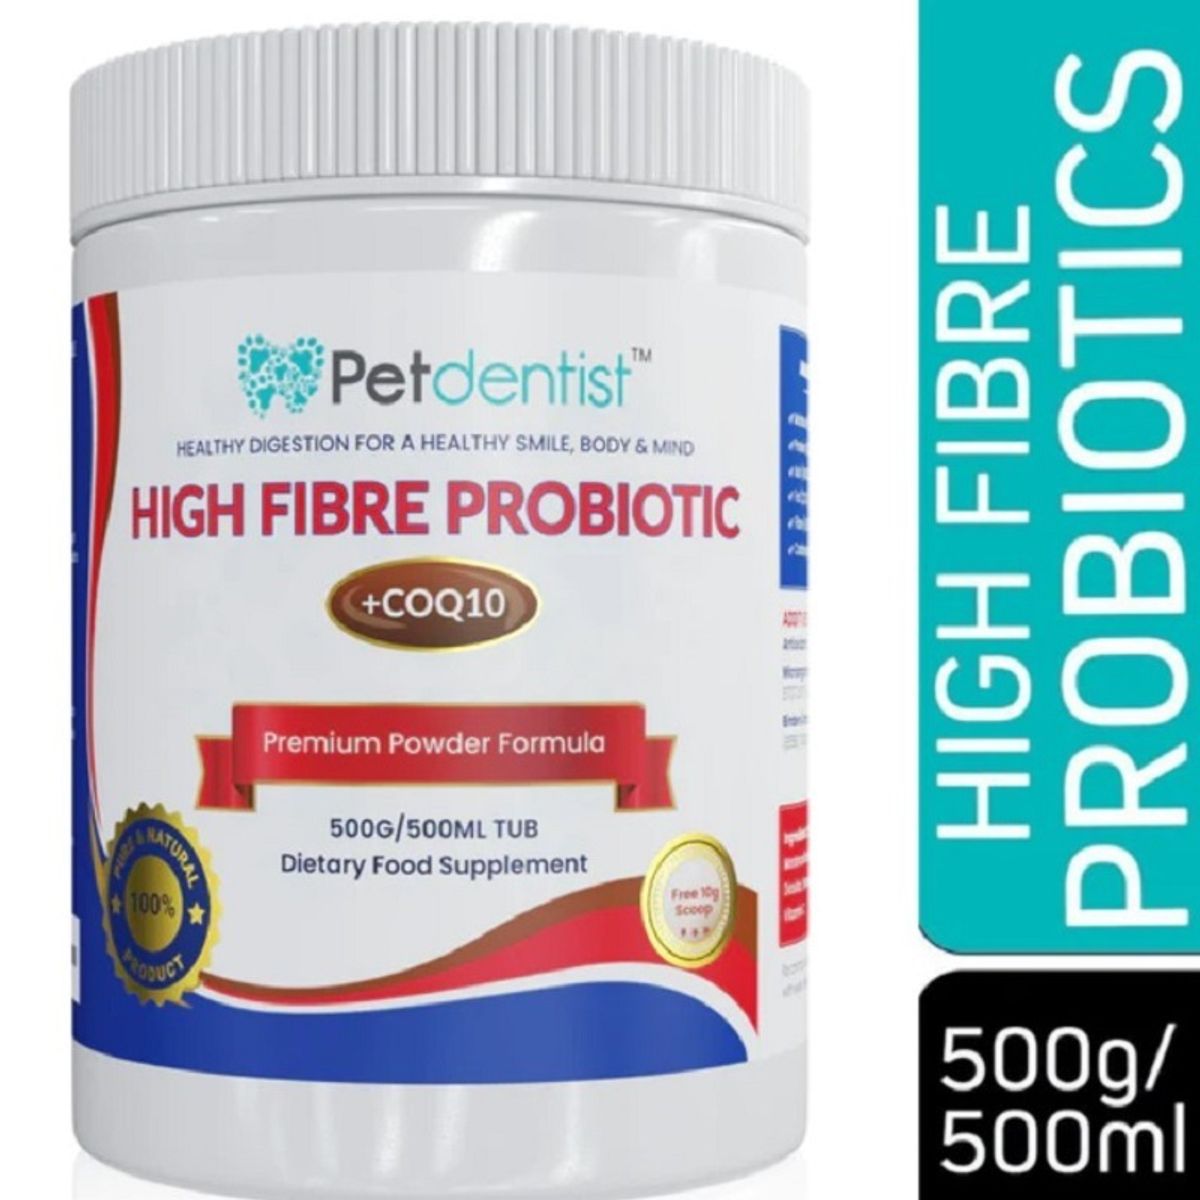 Discover The Power Of Gut Health for Your Furry Friend With Pet Dentist's Dog Probiotics — Petdentist - Buymeacoffee